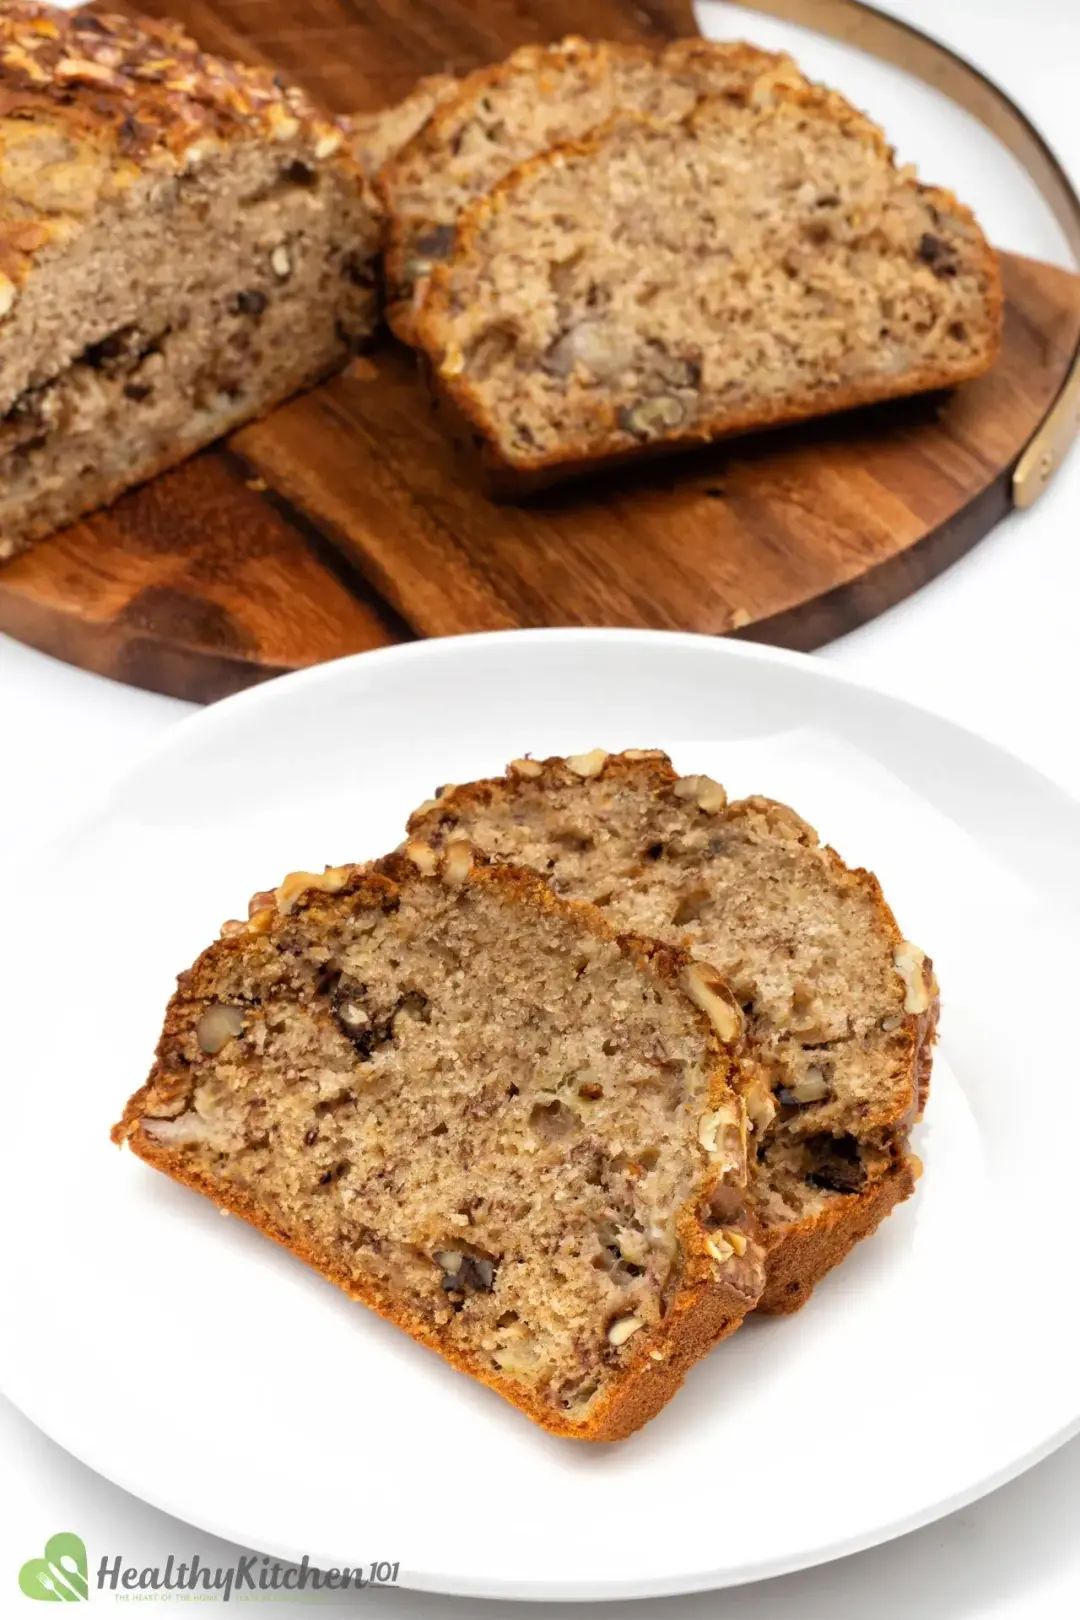 Is Banana Bread good for you